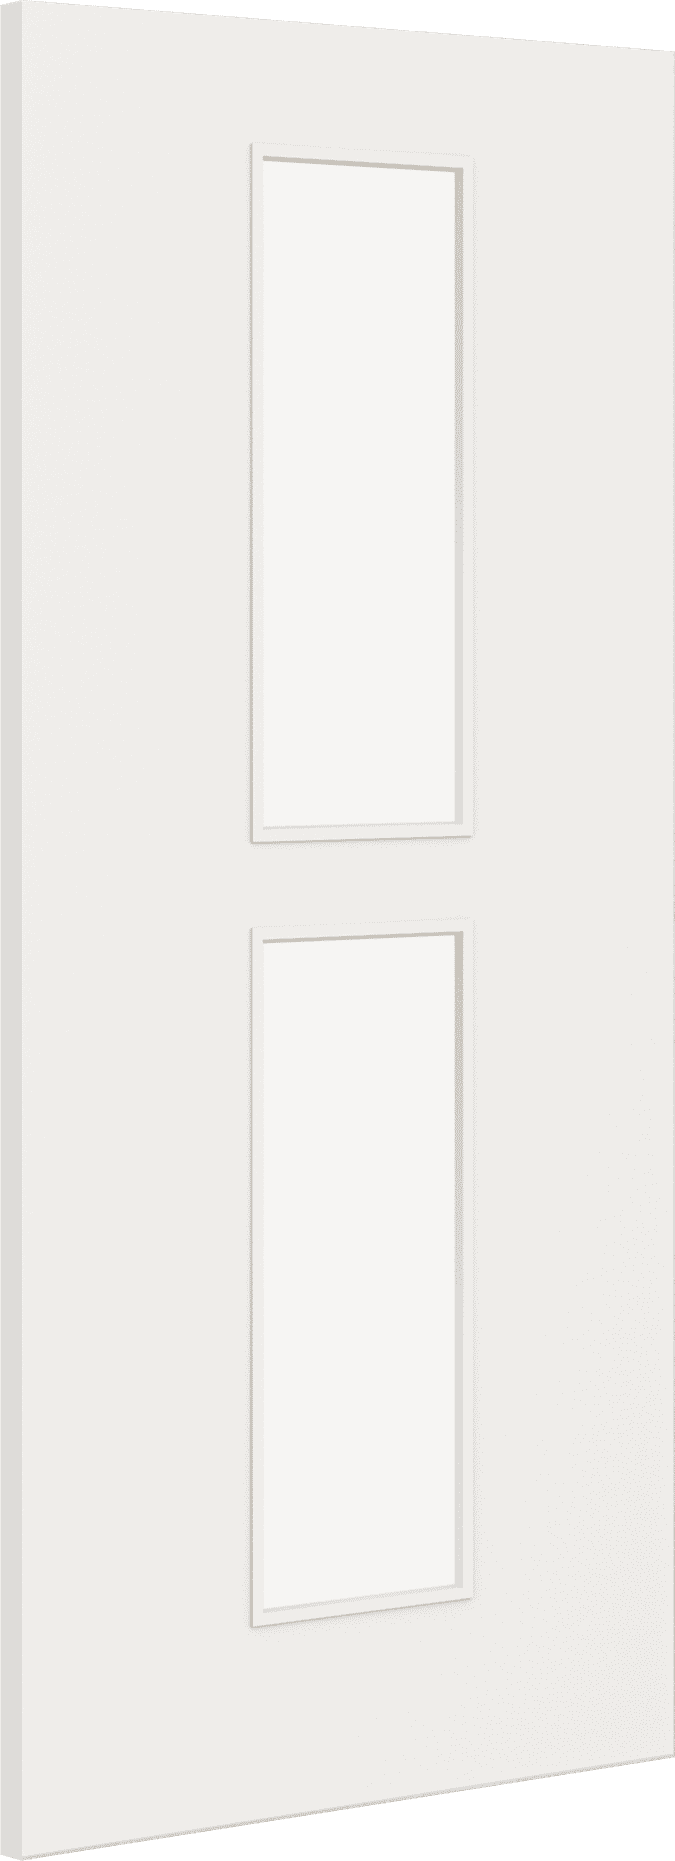 1981mm x 762mm x 44mm (30") Architectural Paint Grade White 12 Frosted Glazed Fire Door Blank